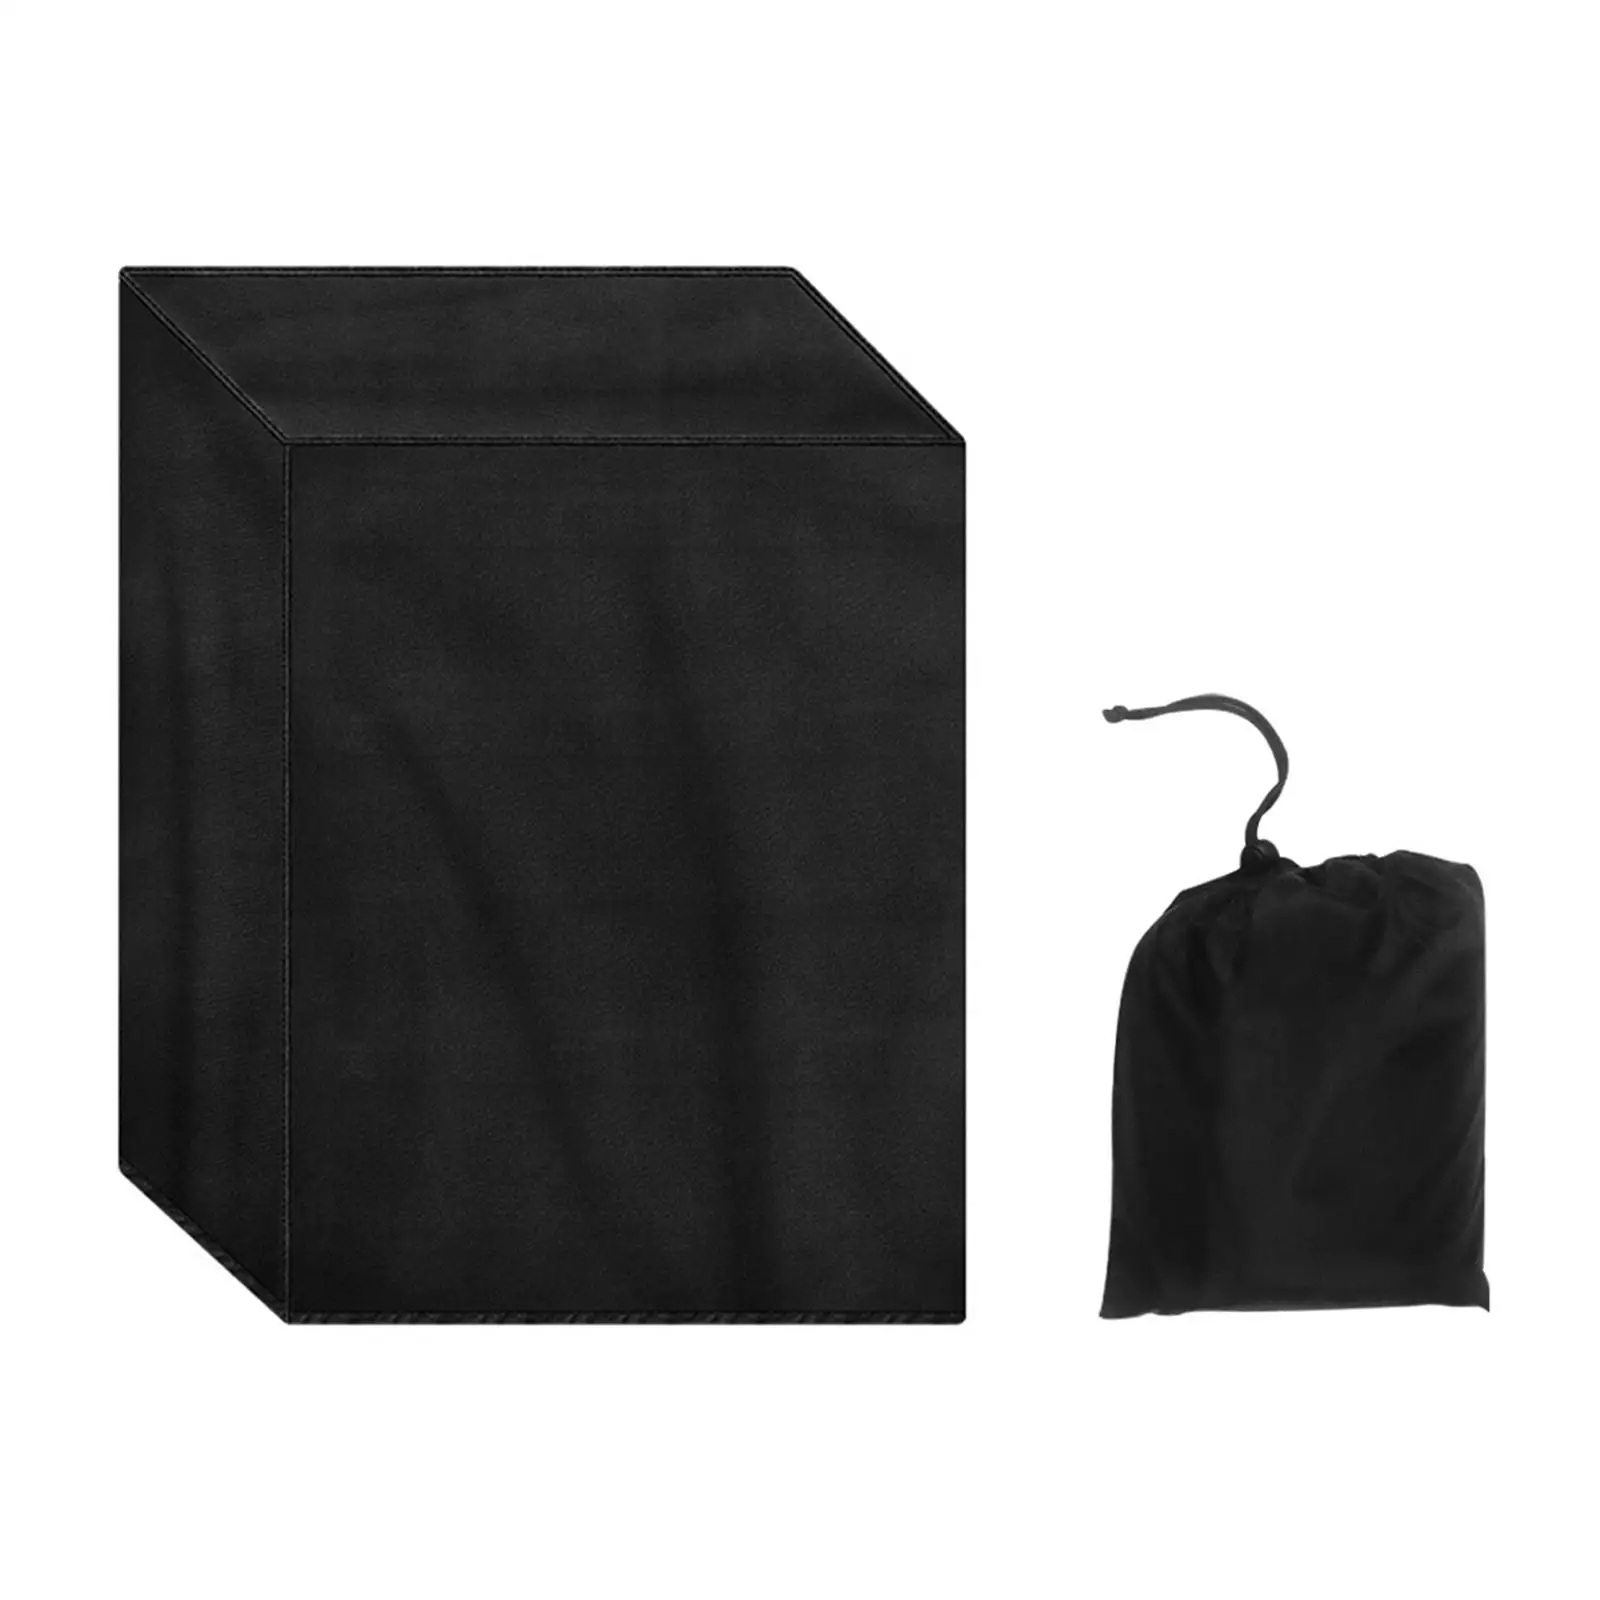 Patio Chair Cover Water Resistant Outdoor Furniture Furniture Protector with Storage Bag Patio Durable Furniture Covers